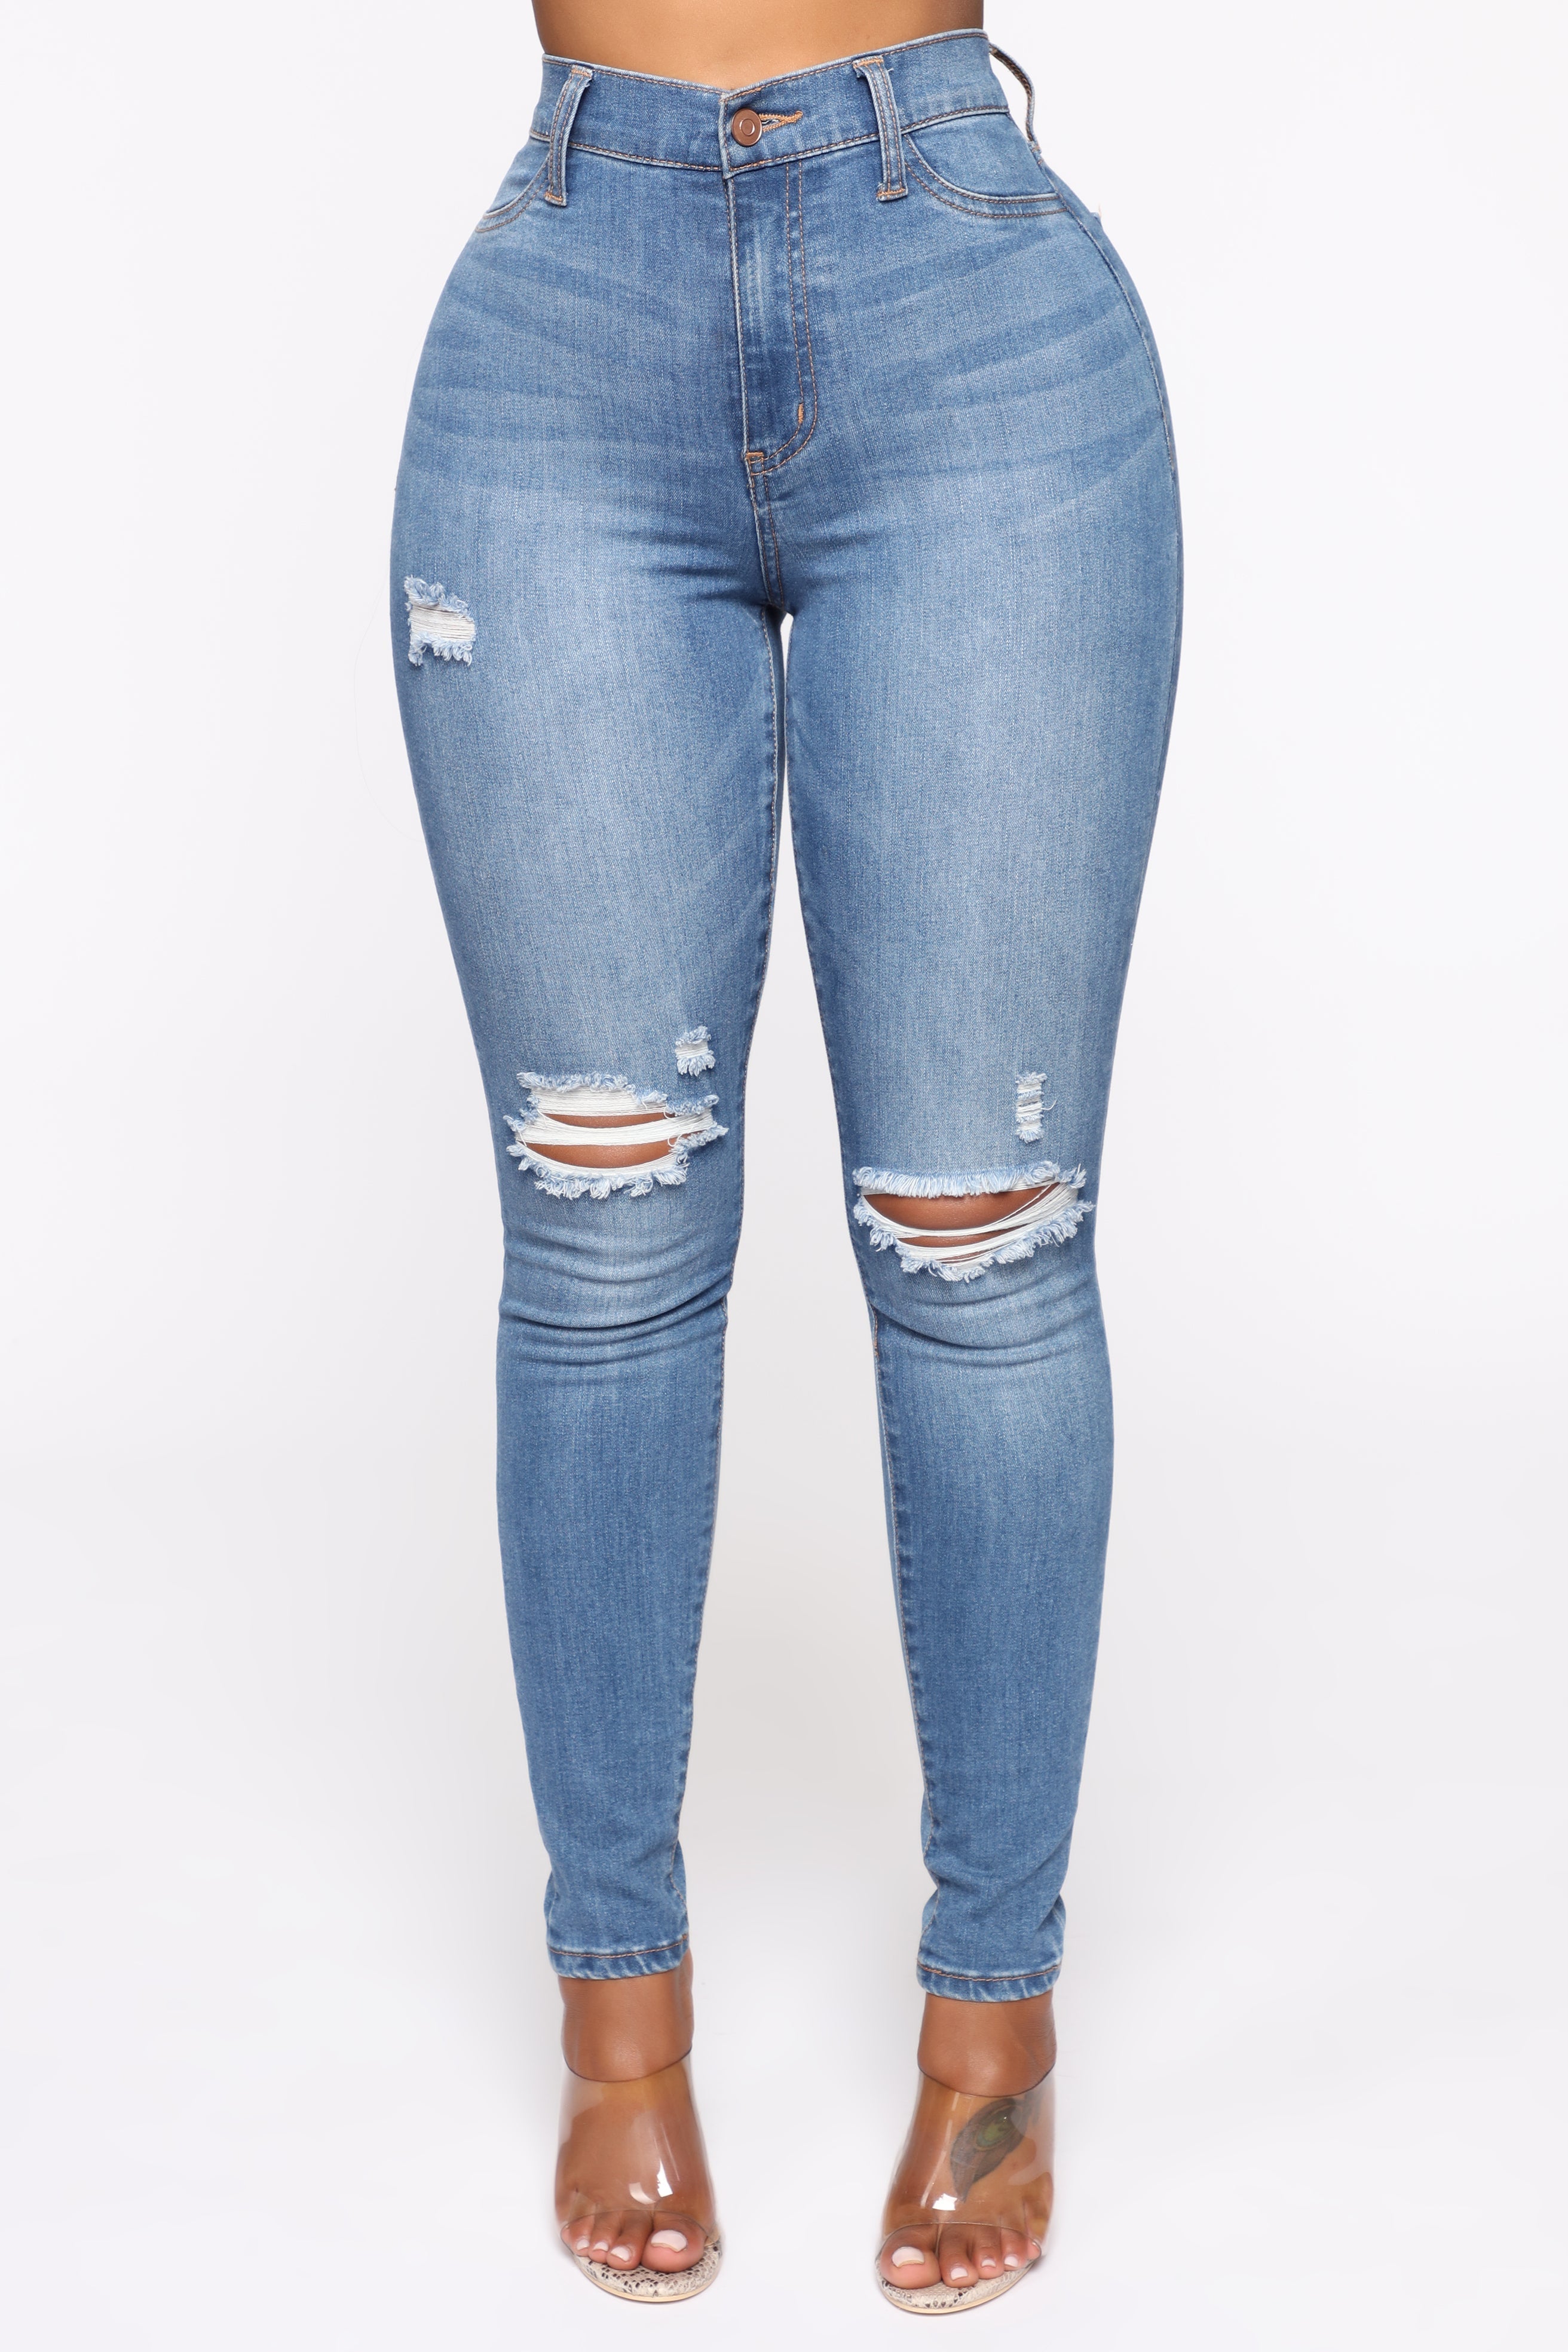 Our Favorite High Rise Skinny Jeans - Medium Blue Wash